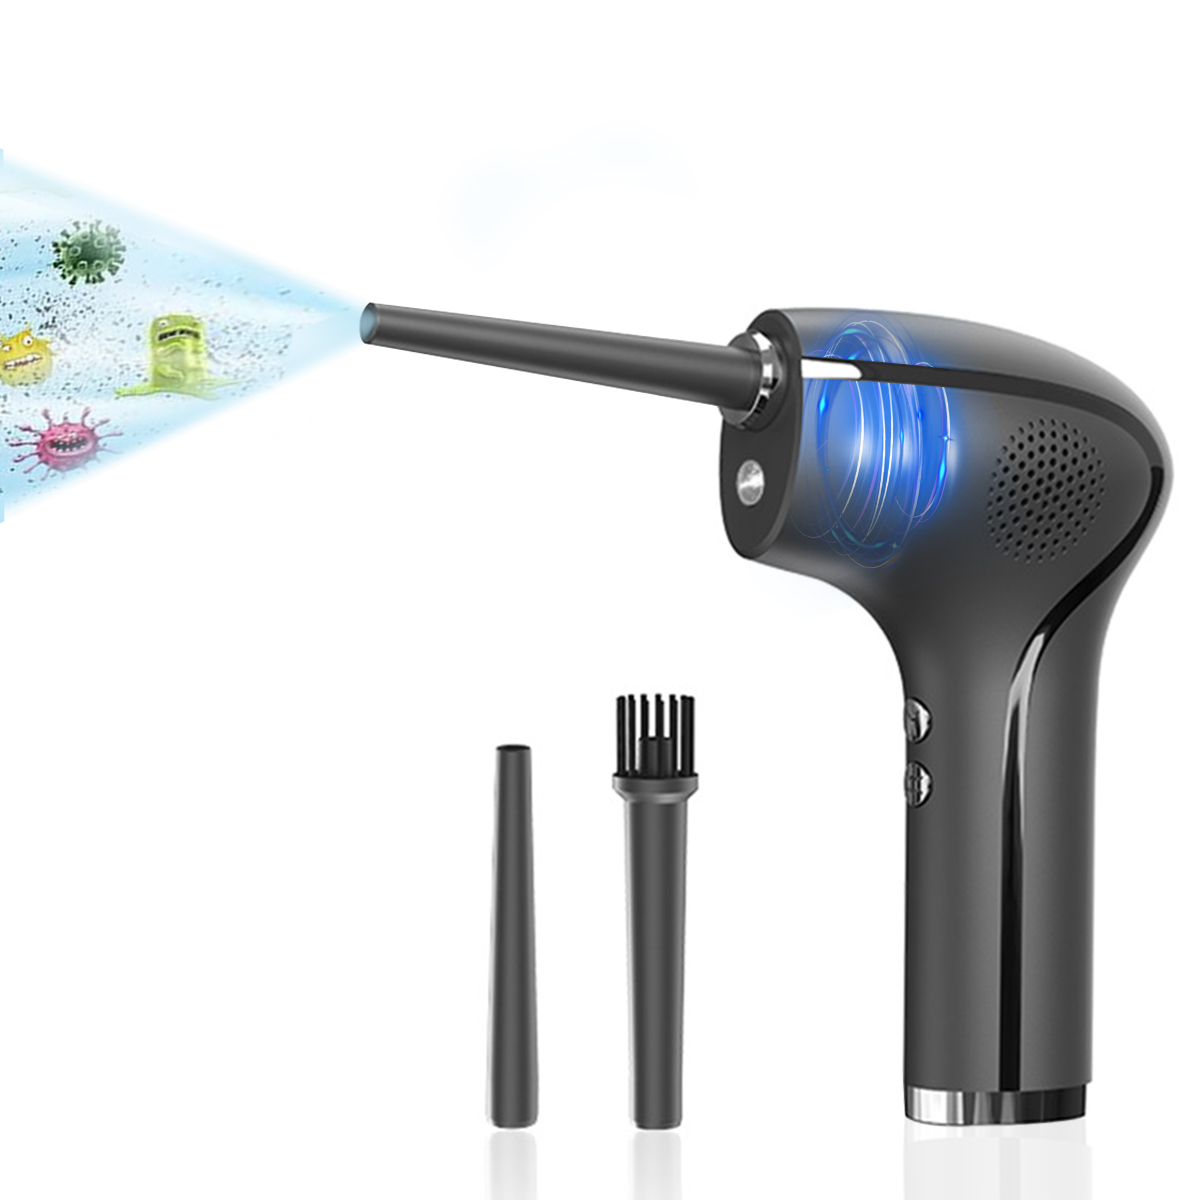 Vacuum-Cleaner-Air-Blower-Air-Duster-Cleaning-Wireless-Rechargeable-Compressed-for-Laptop-Computer-K-1967128-14